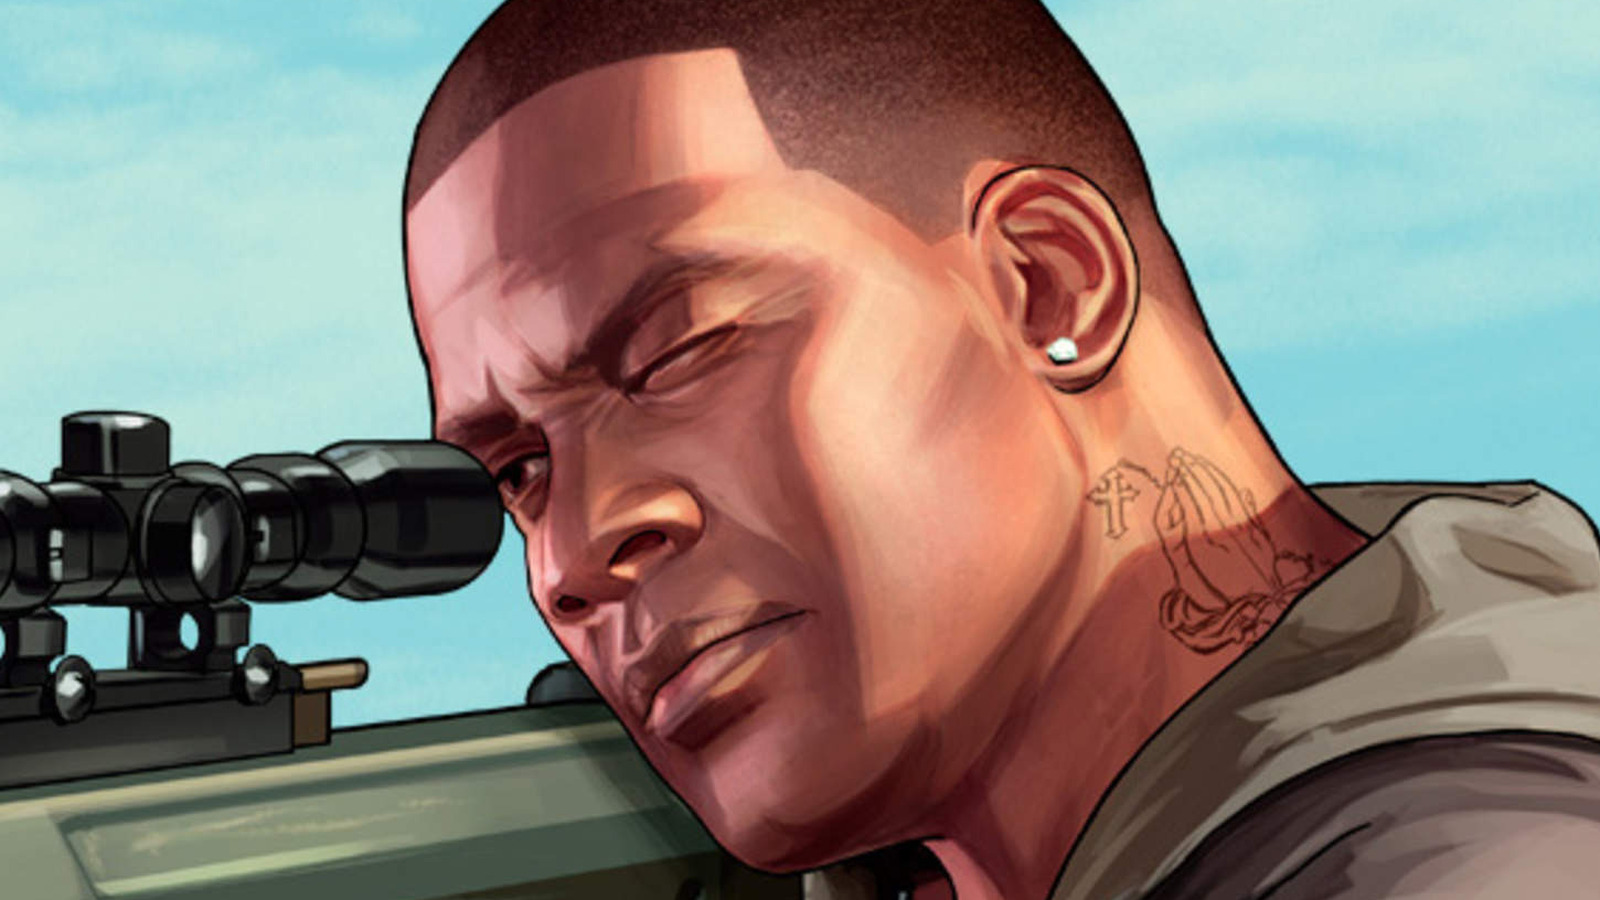 New GTA VI map leak gives fans the one thing they all want